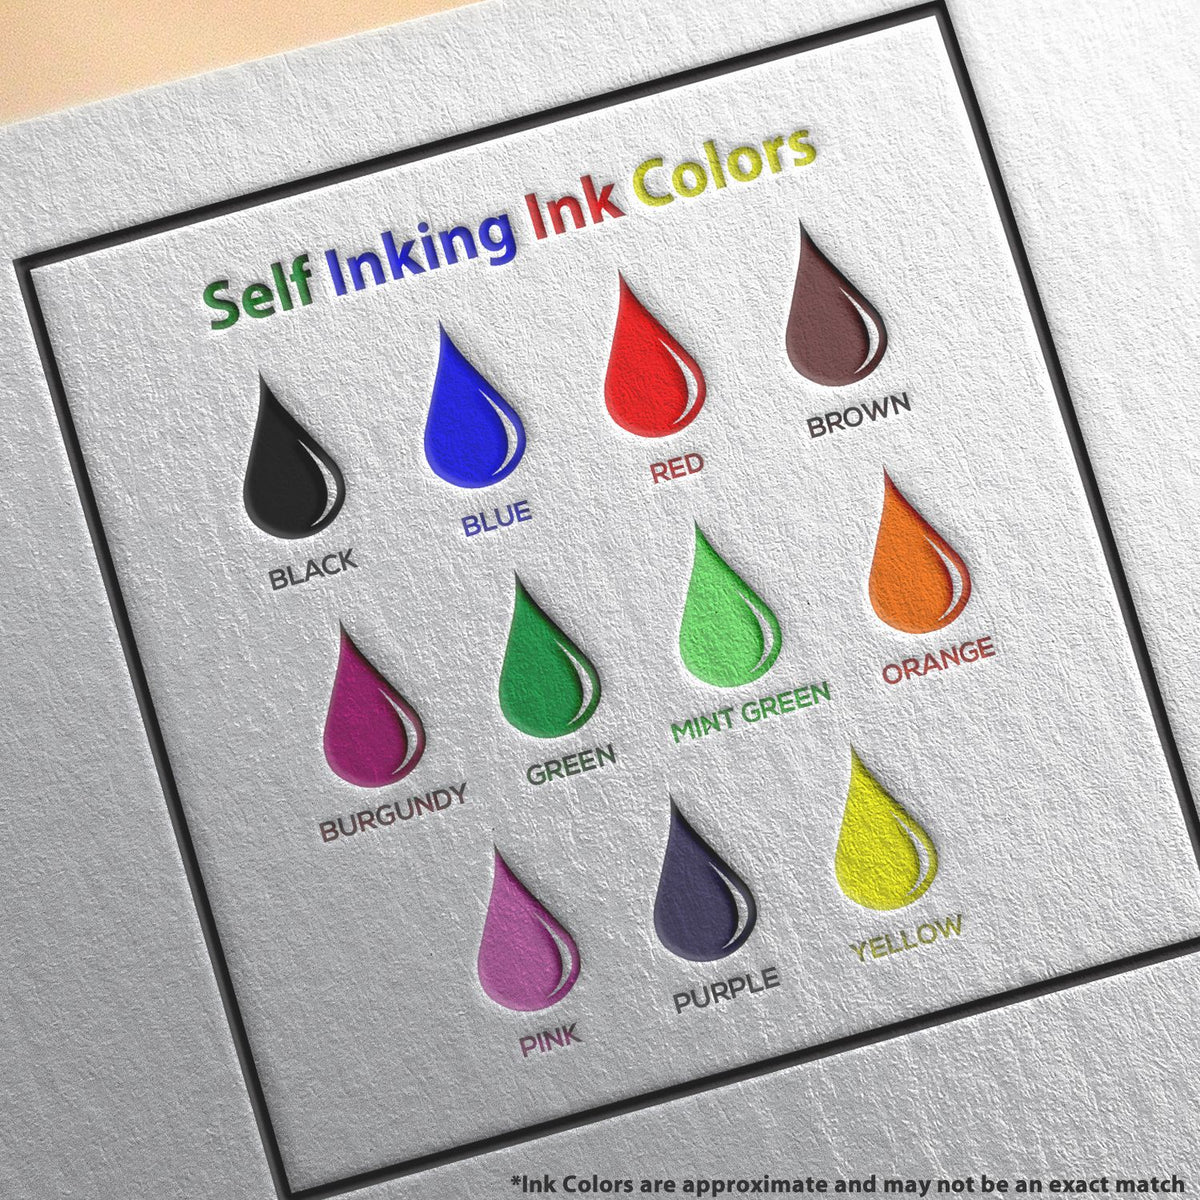 A picture showing the different ink colors or hues available for the Heavy-Duty Minnesota Rectangular Notary Stamp product.